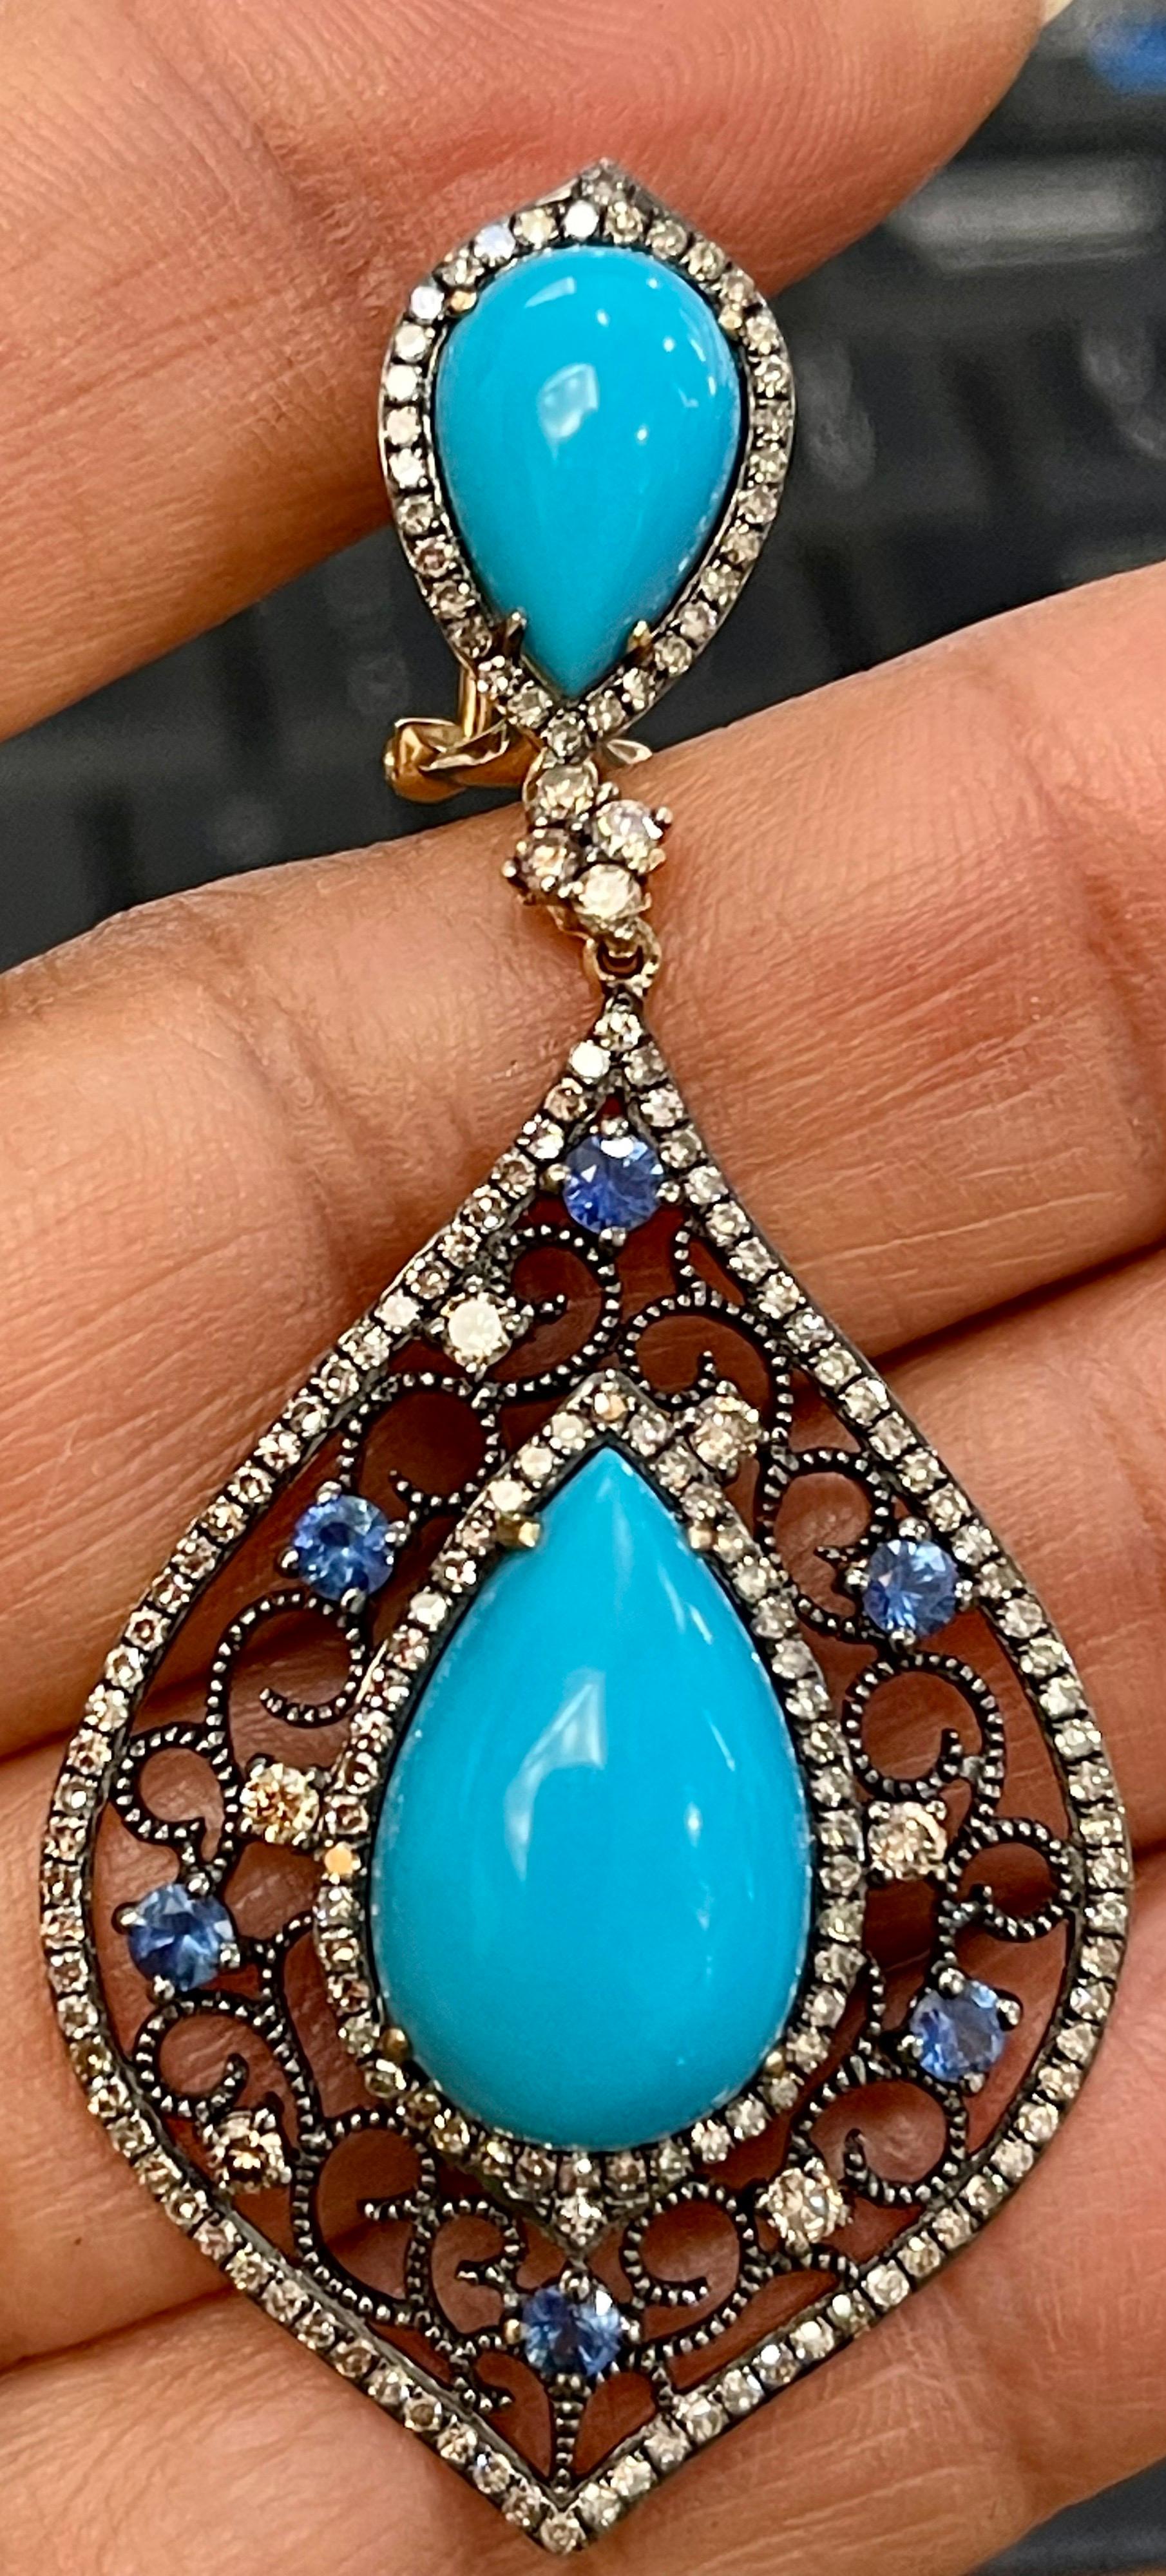 Turquoise, Champagne Diamond & Sapphire Dangling Earring In 14 Karat Yellow Gold
Each  Pear shape turquoise about 3.5  to 4 carat in the drop and approximately 2.5 ct in the stud part of the earrings.
Very desirable color and quality.
perfect pair